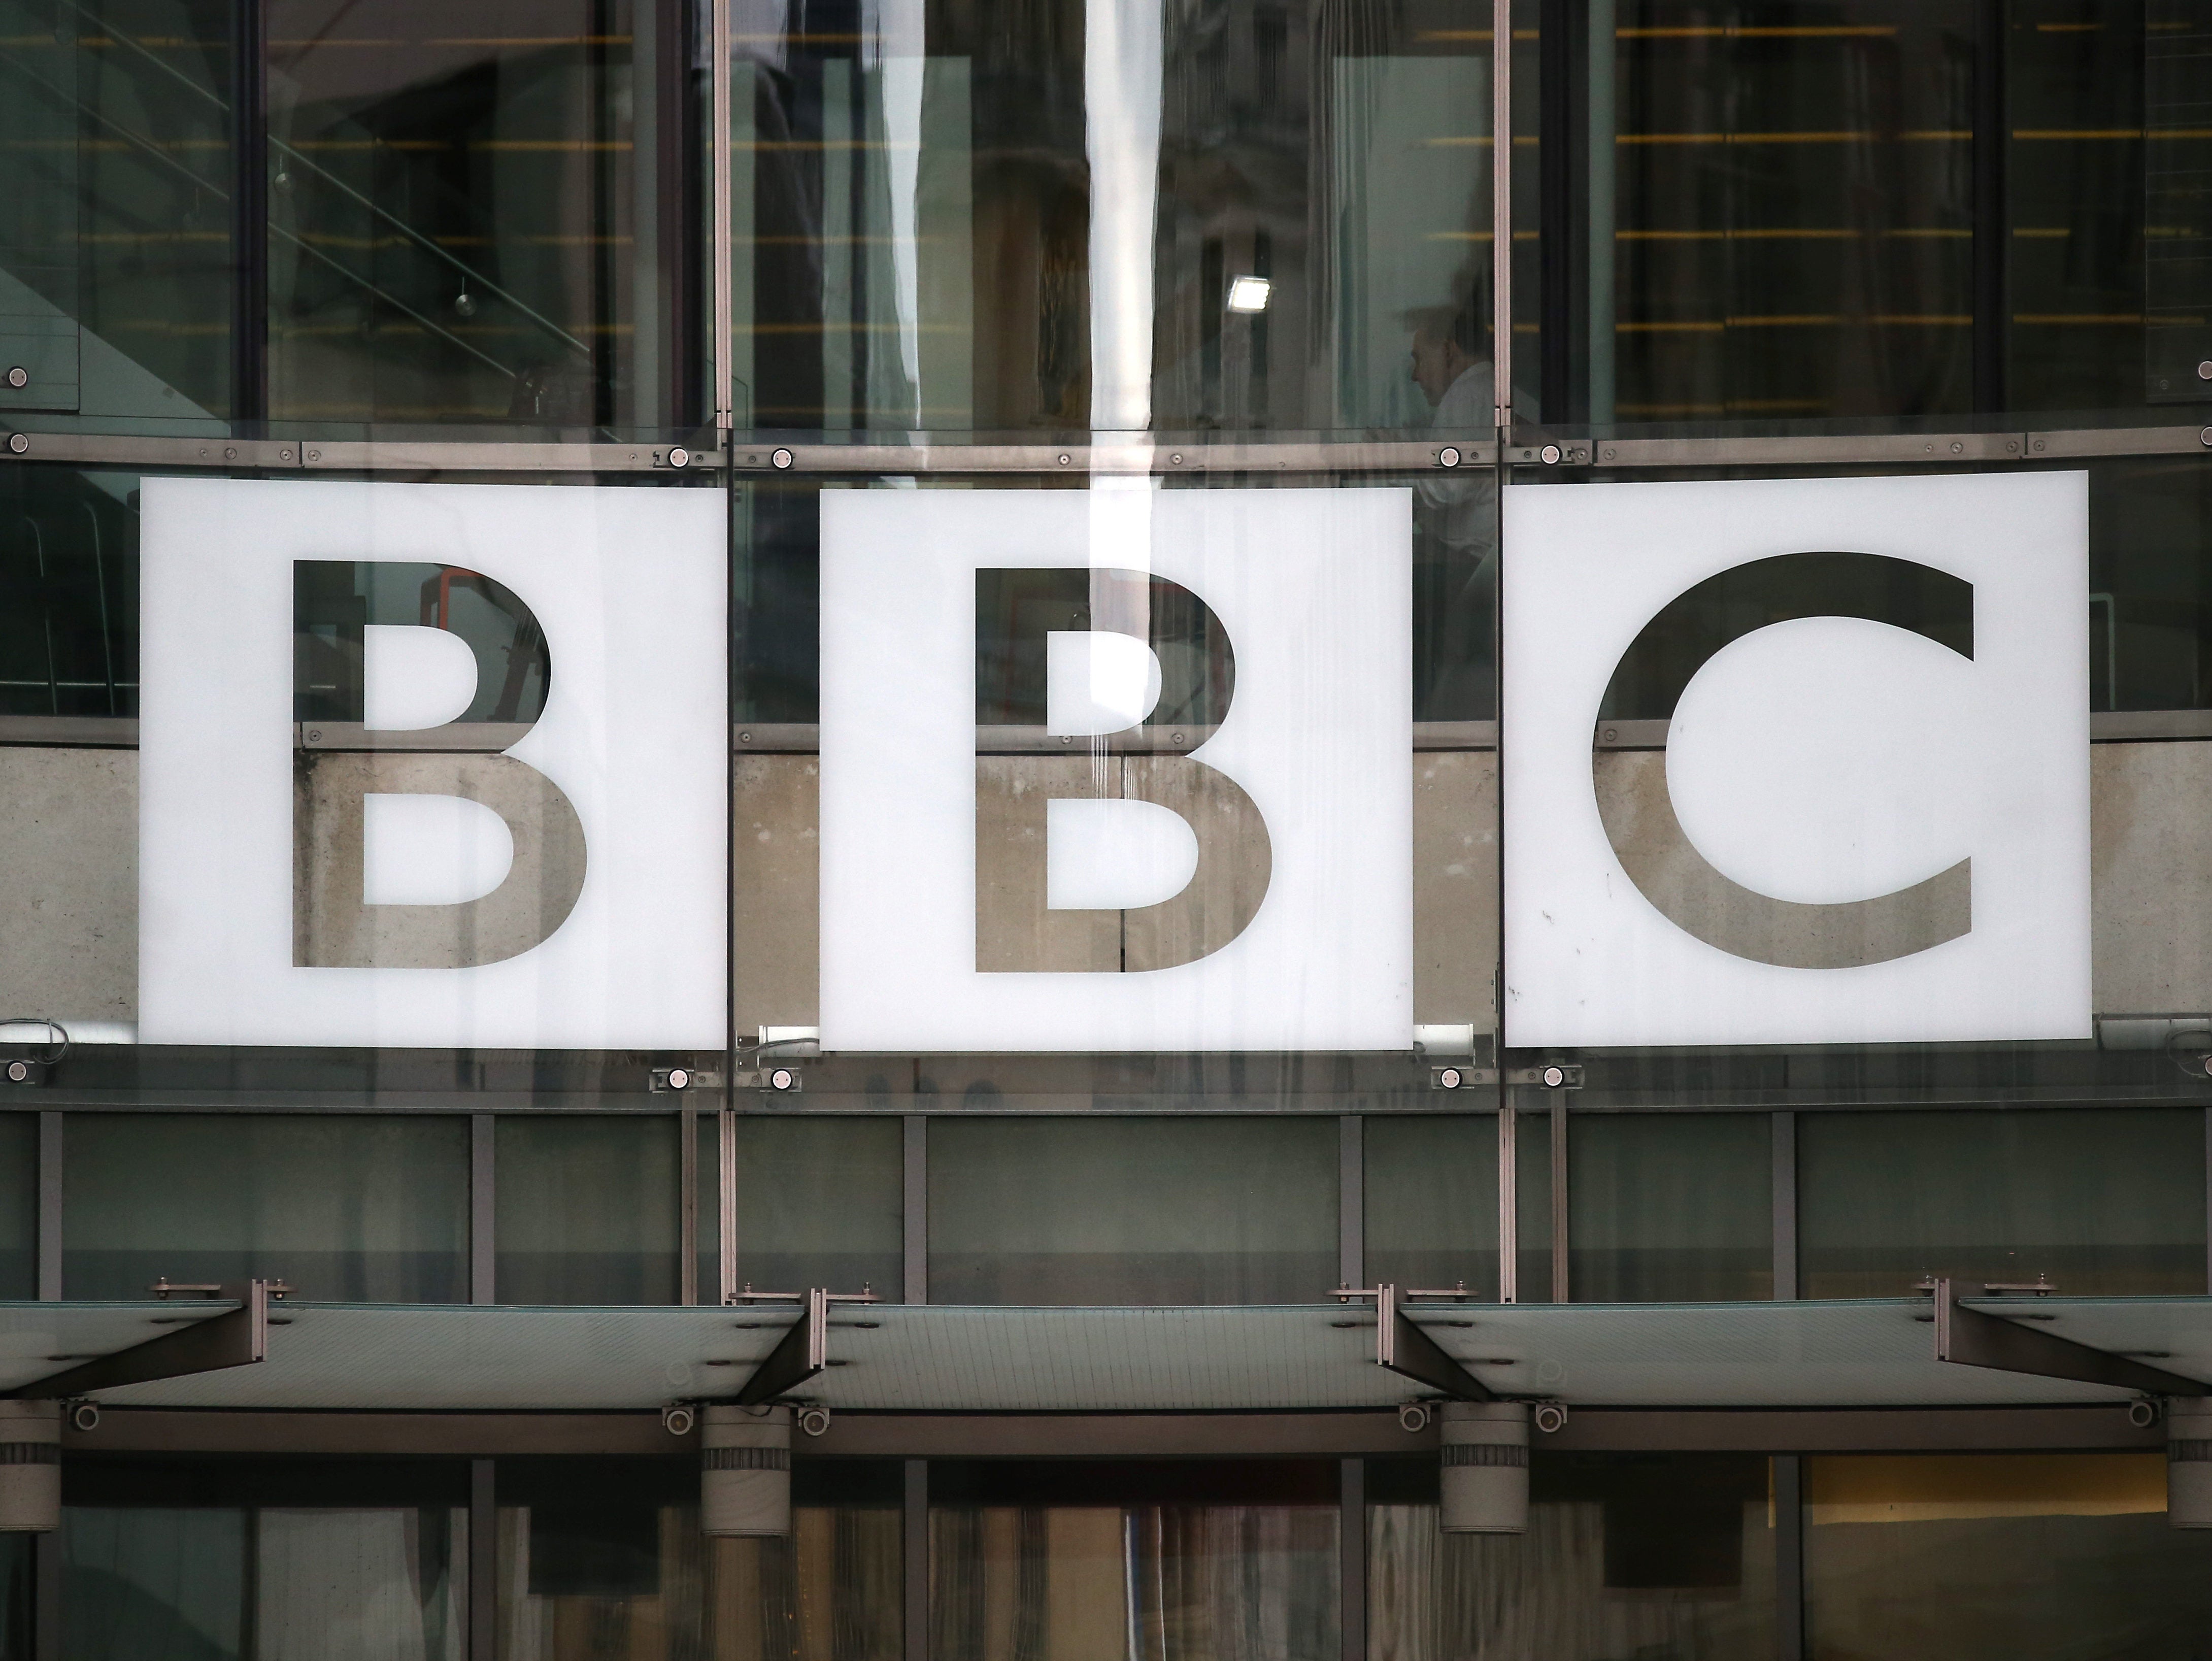 BBC most trusted TV newsbrand in US with Fox News in second place, new analysis reveals